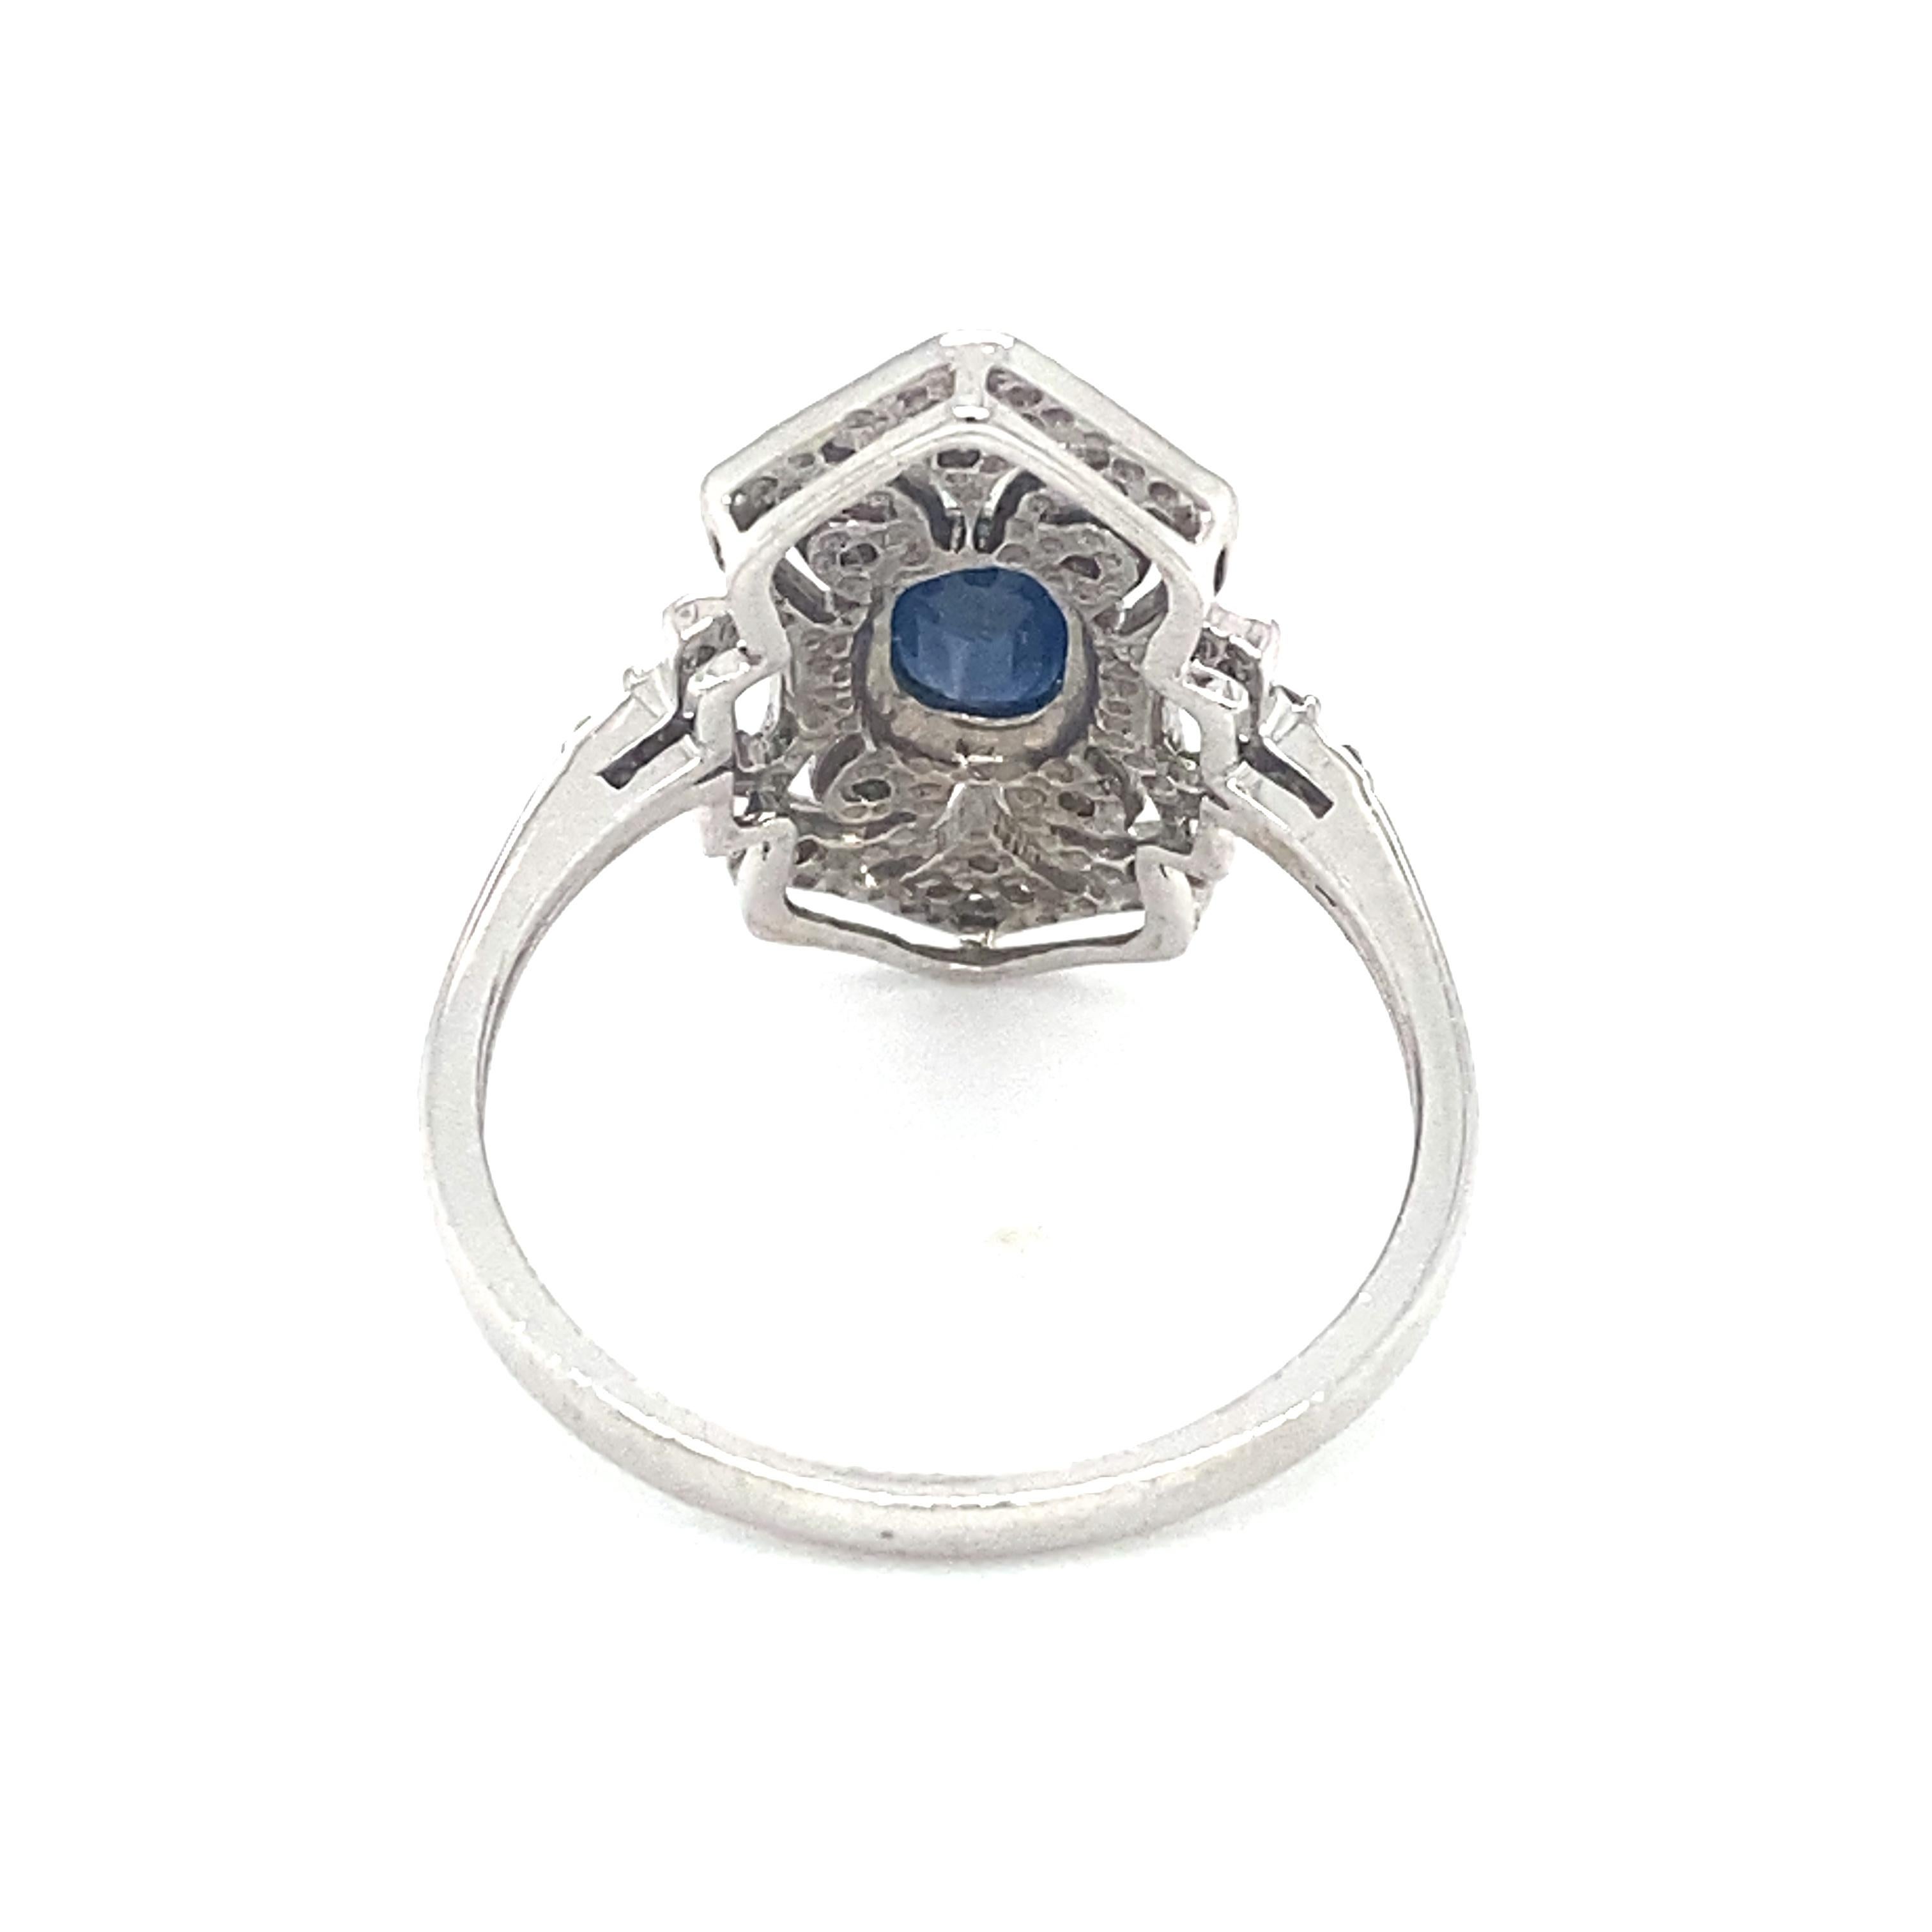 Item Details: This vintage ring has an Art Deco geometric style with a center sapphire and accent diamonds.

Circa: 1950s
Metal Type: 14k white gold
Weight: 3.8g
Size: US 8, resizable

Diamond Details:

Carat: 0.20 carat total weight
Shape: